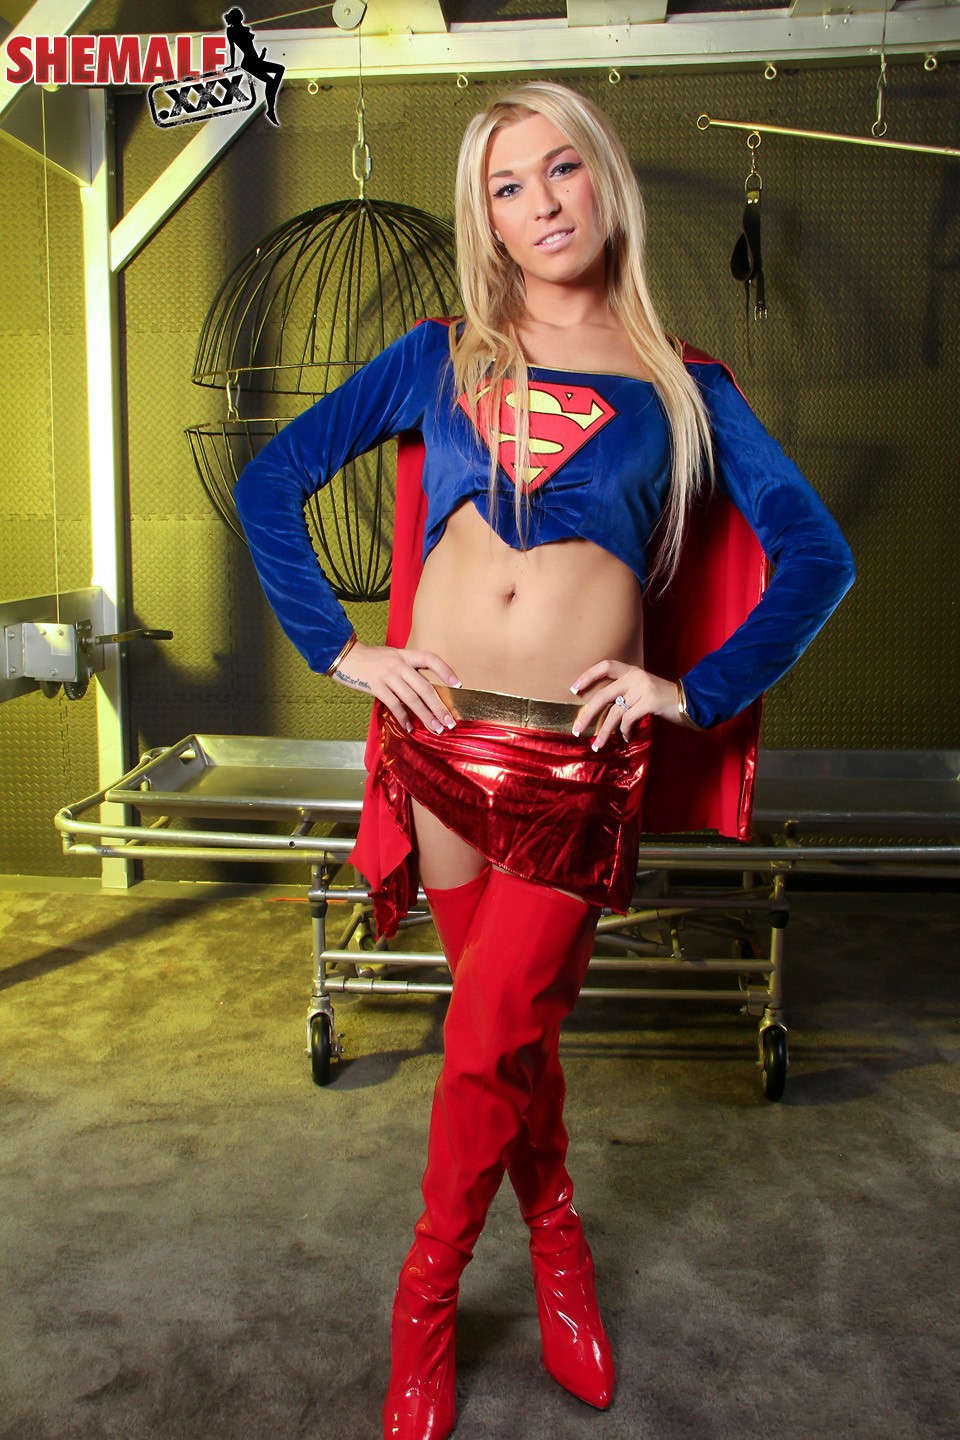 Huge Boobs Shemale Super Heroes - Shemale.XXX | The Official Aubrey Kate